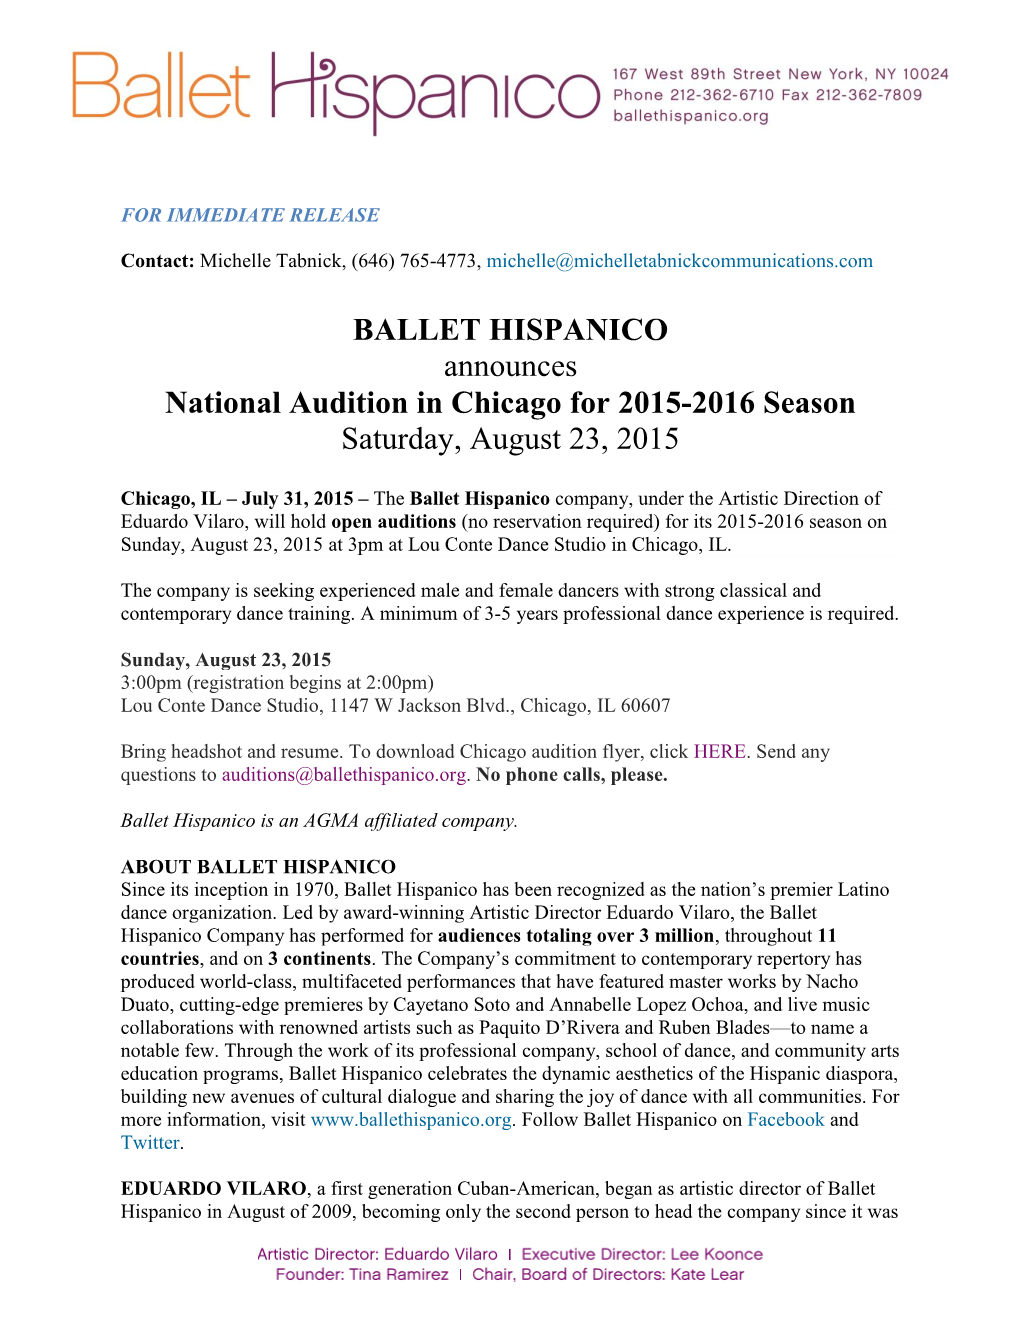 BALLET HISPANICO Announces National Audition in Chicago for 2015-2016 Season Saturday, August 23, 2015